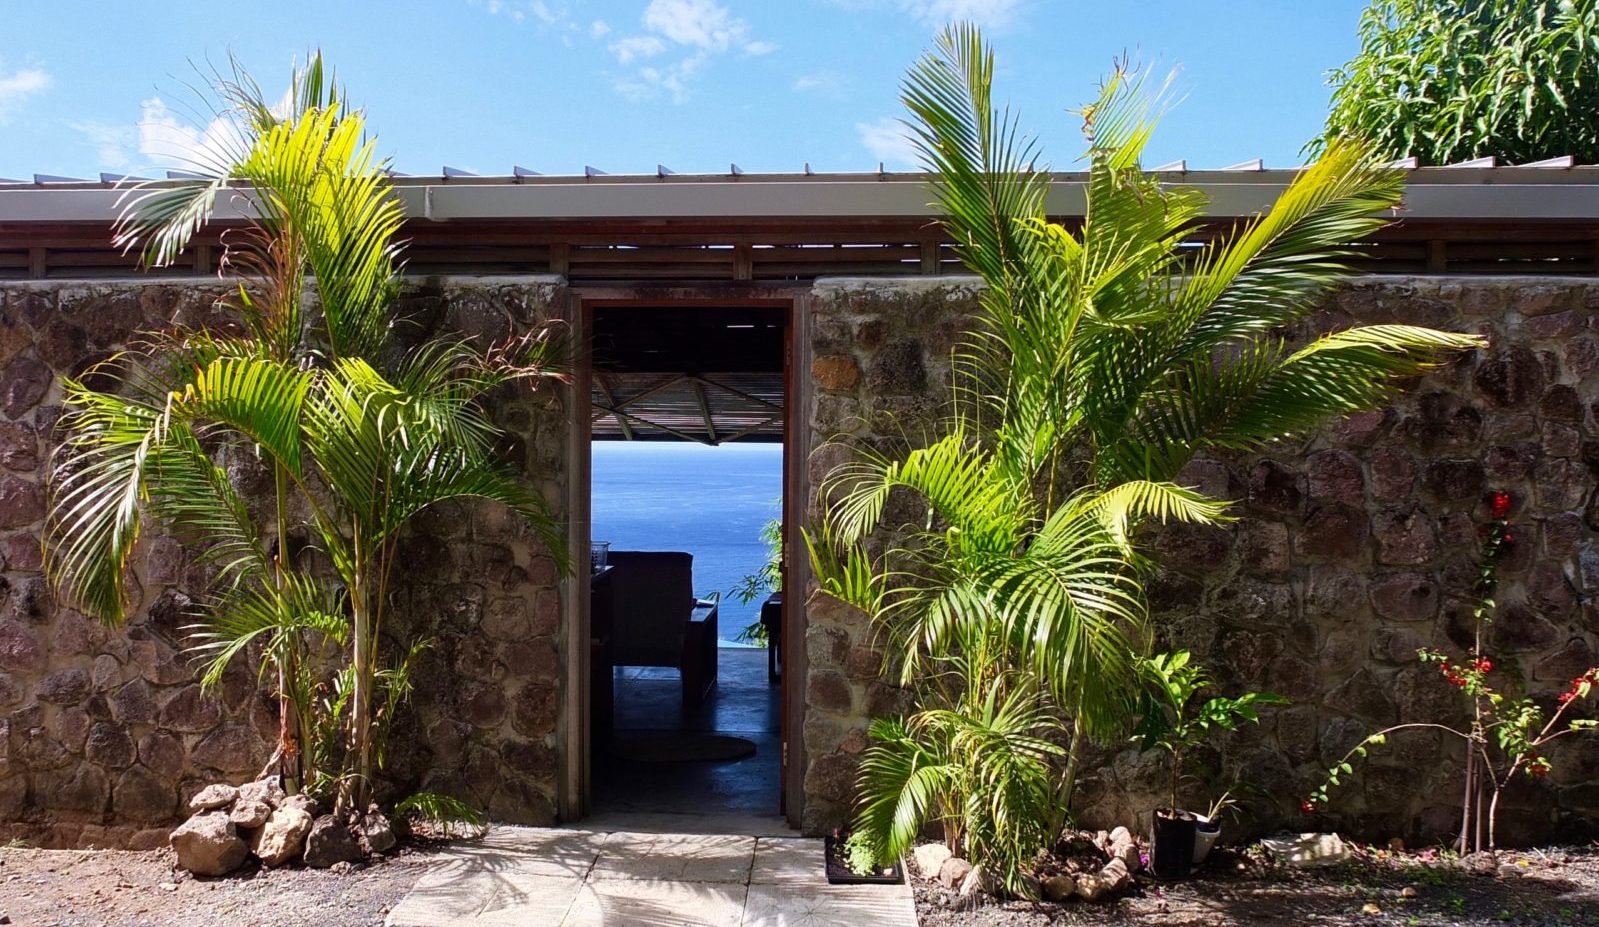 The front door of the Lodge at Cosmos St Lucia sits within a stone wall surrounded by palm fronds. Through the doorway the blue of the Caribbea Sea is visible